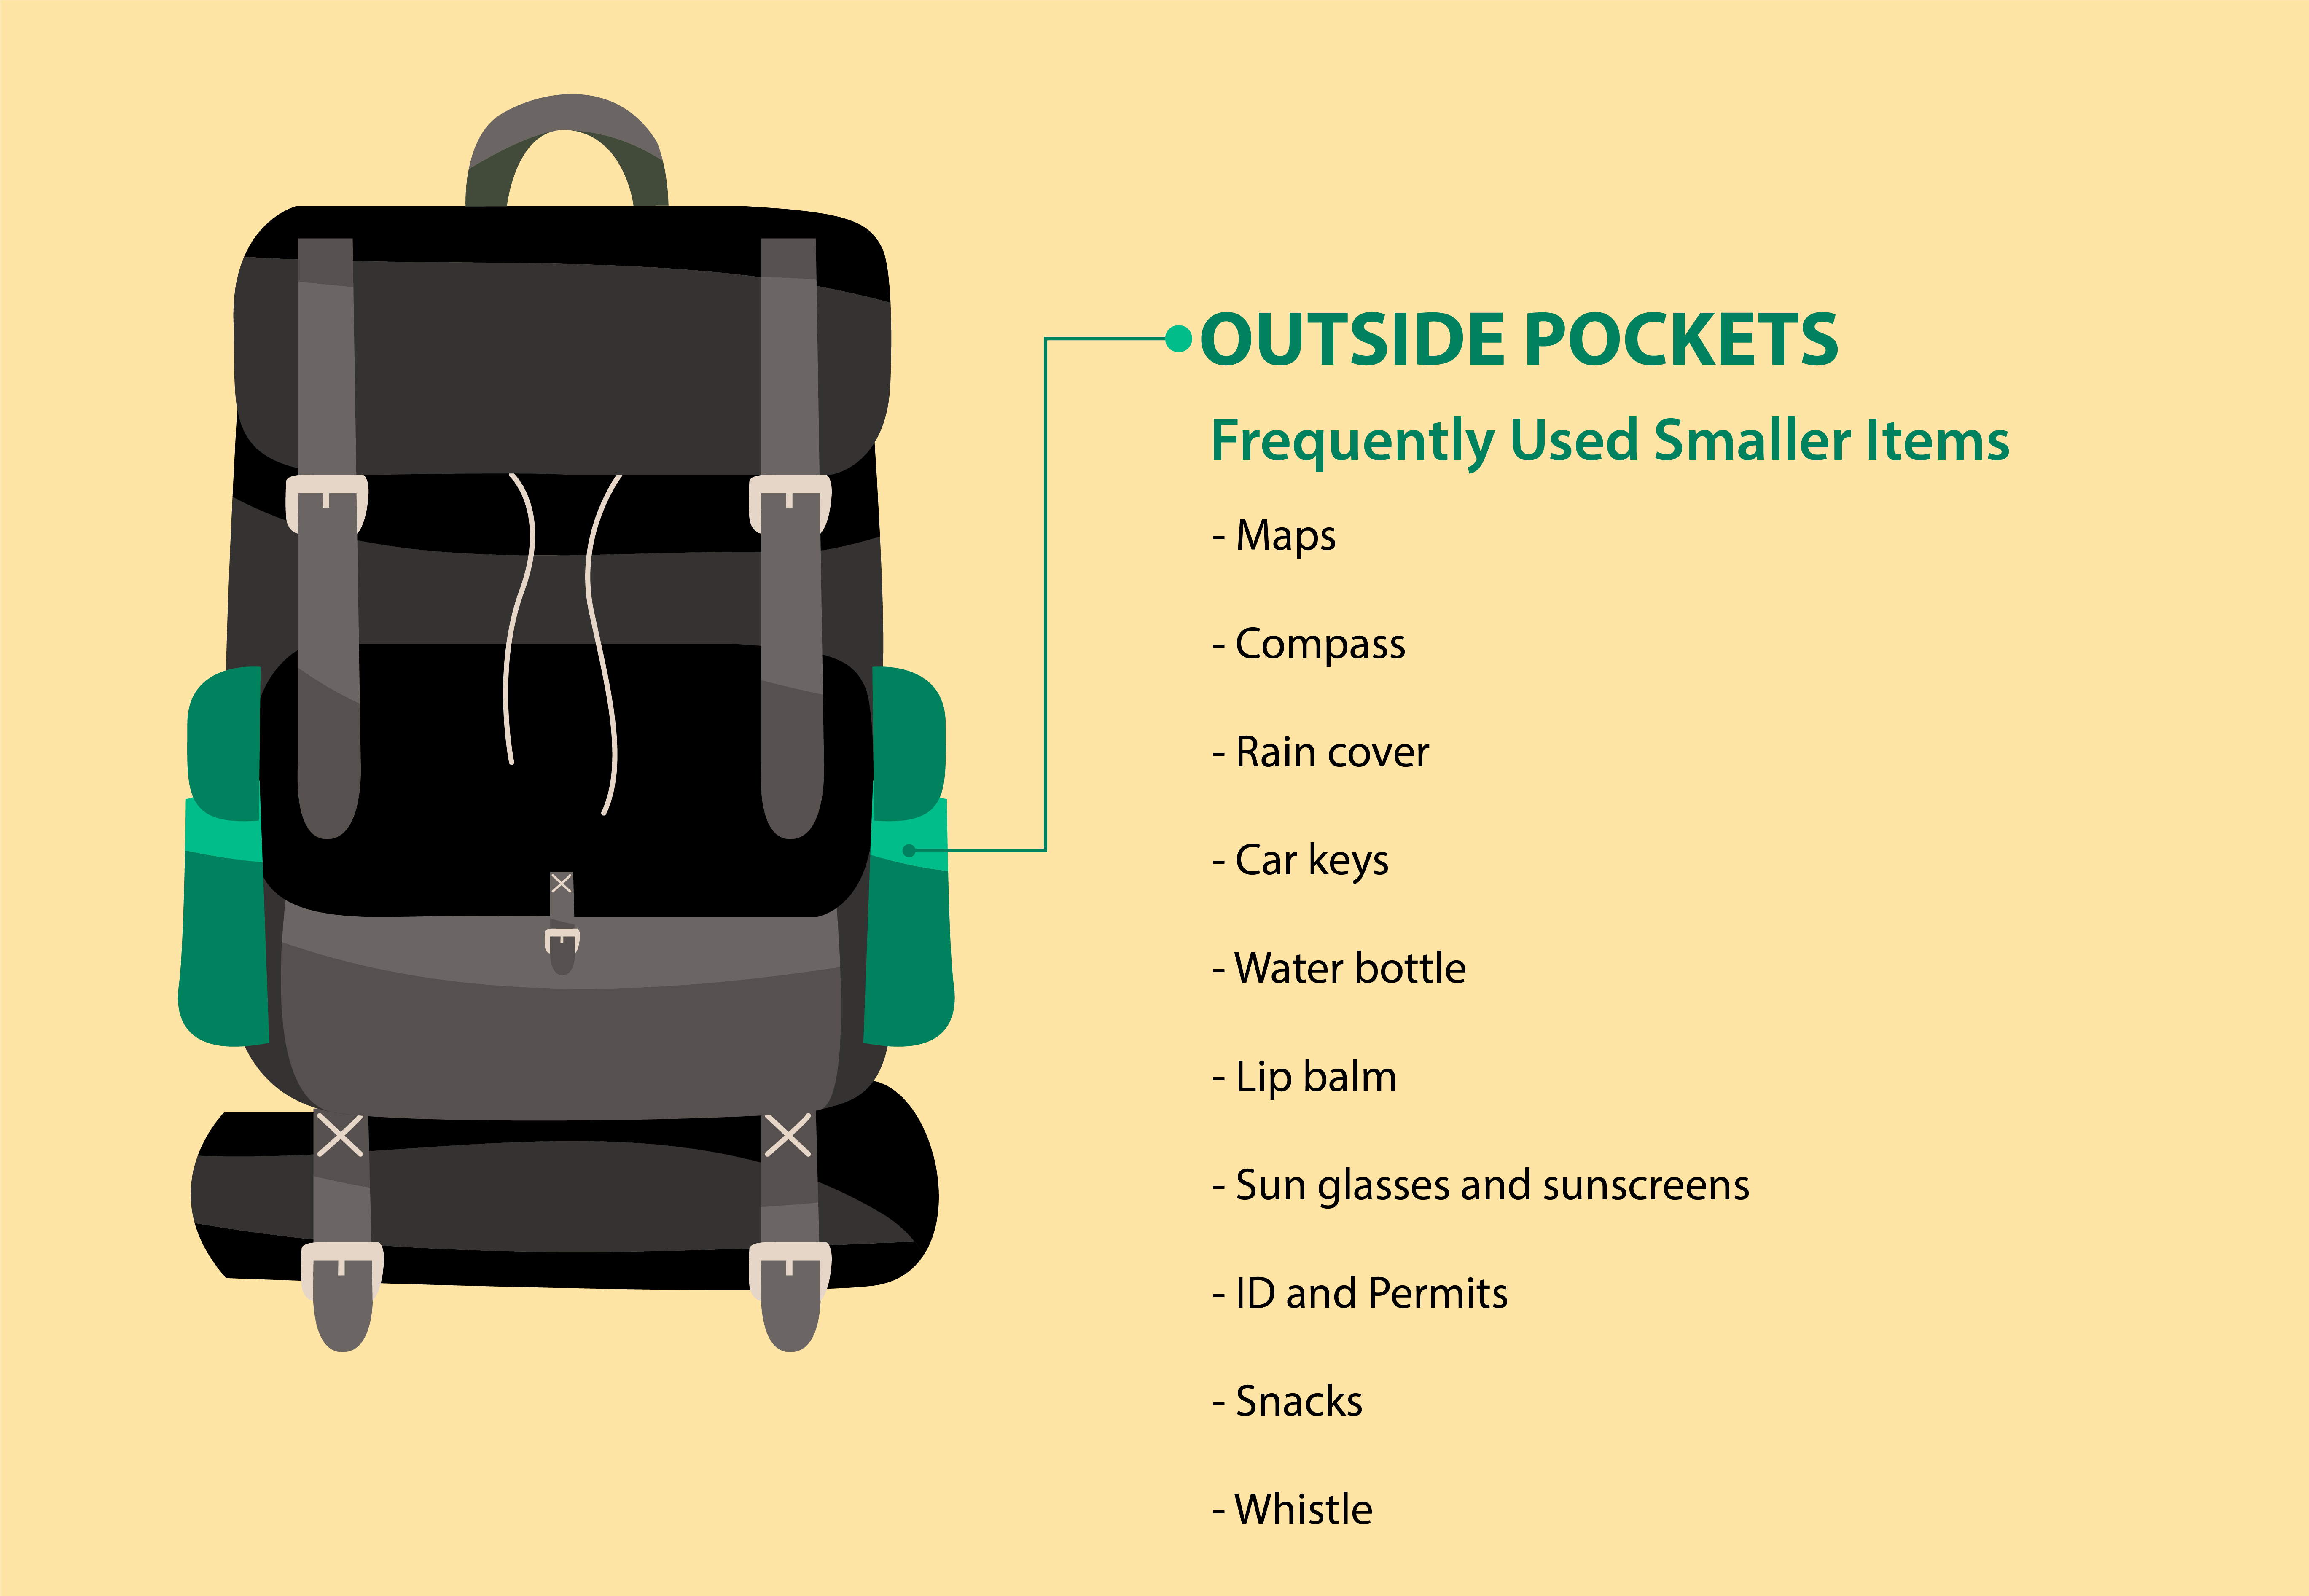 outside pockets of the backpack - pack smaller, frequently accessed items